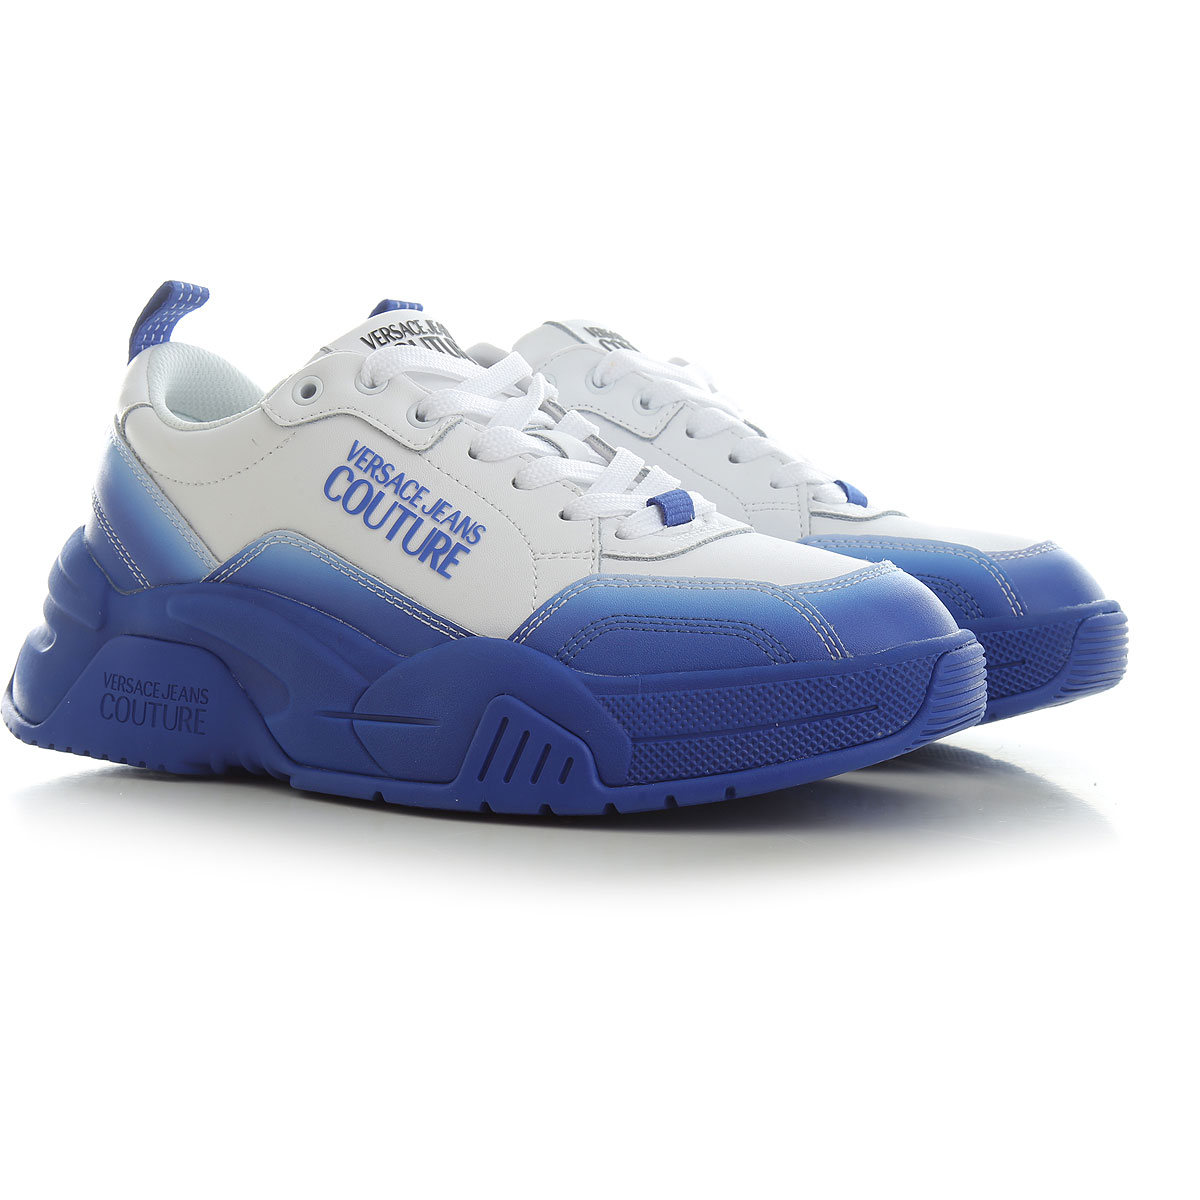 Mens Shoes Versace Jeans Couture , Style code: 72ya3sf6-71960-le5